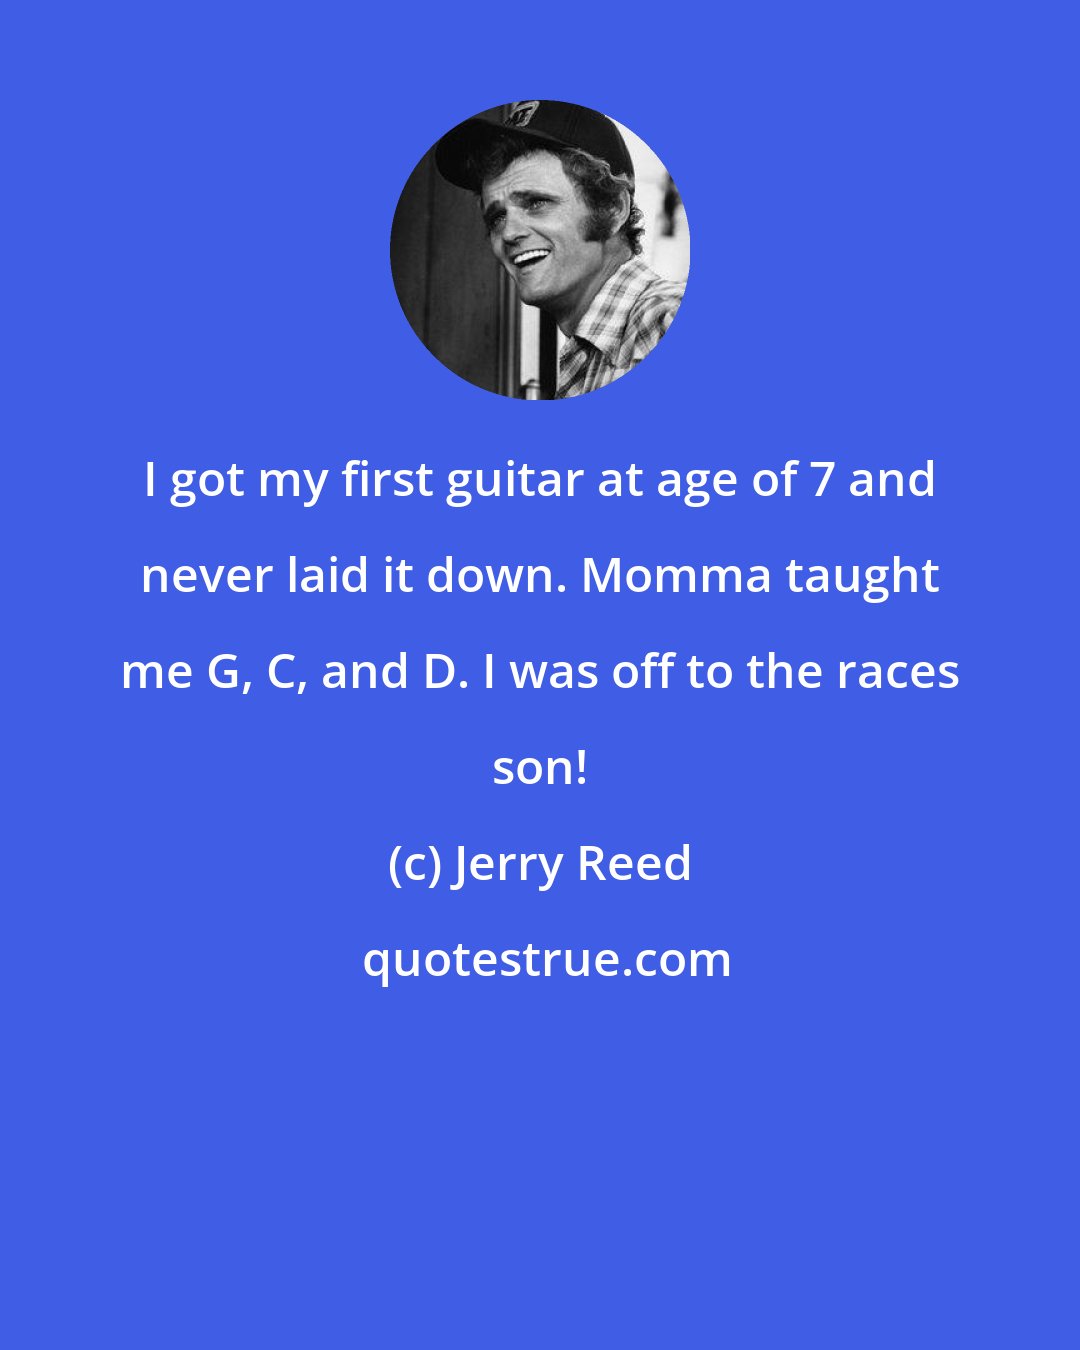 Jerry Reed: I got my first guitar at age of 7 and never laid it down. Momma taught me G, C, and D. I was off to the races son!